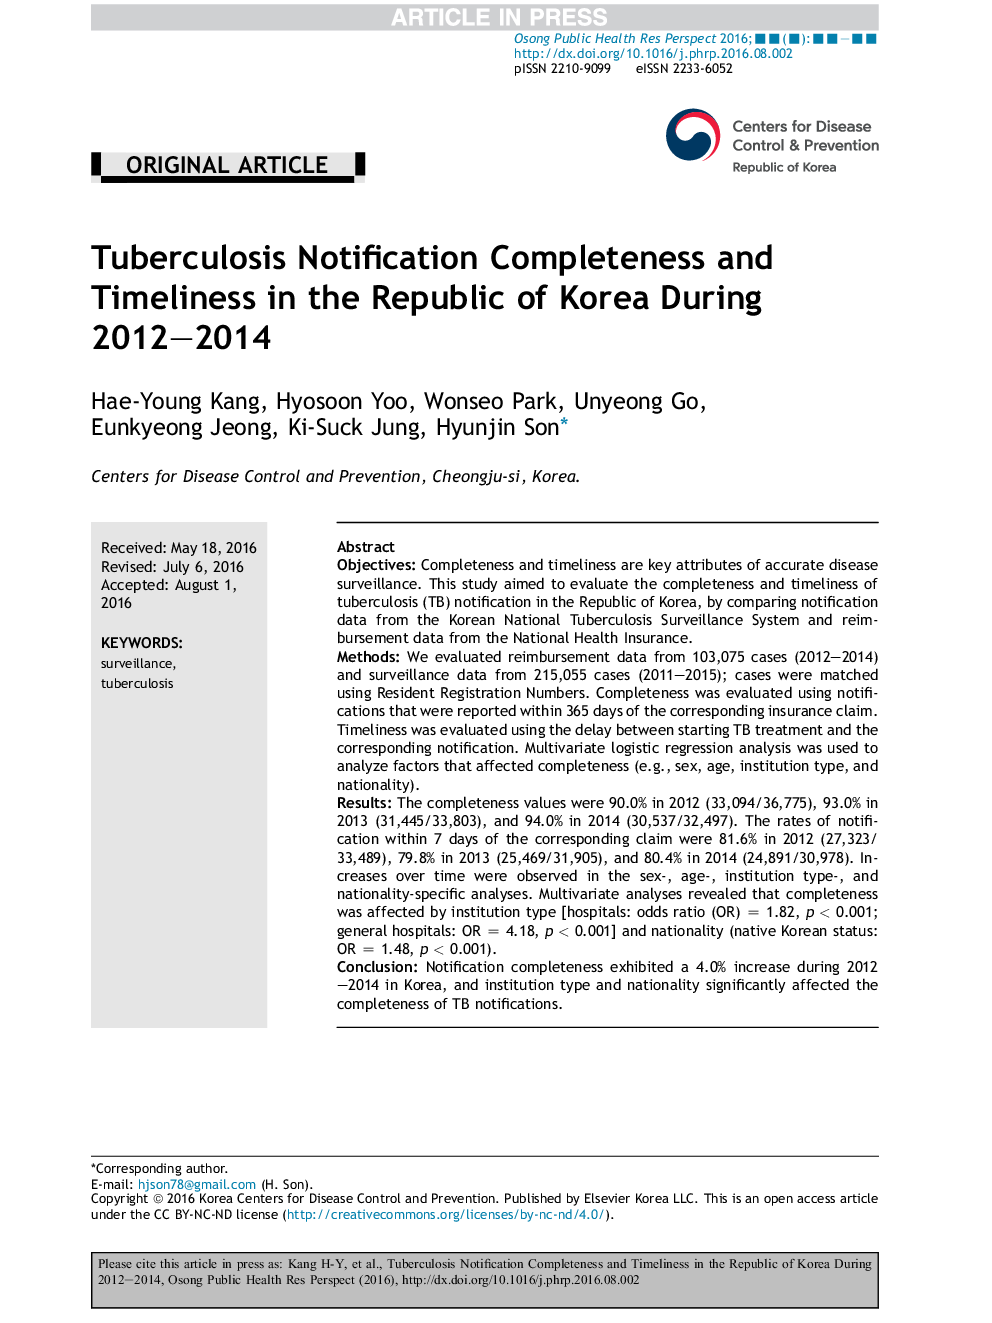 Tuberculosis Notification Completeness and Timeliness in the Republic of Korea During 2012-2014